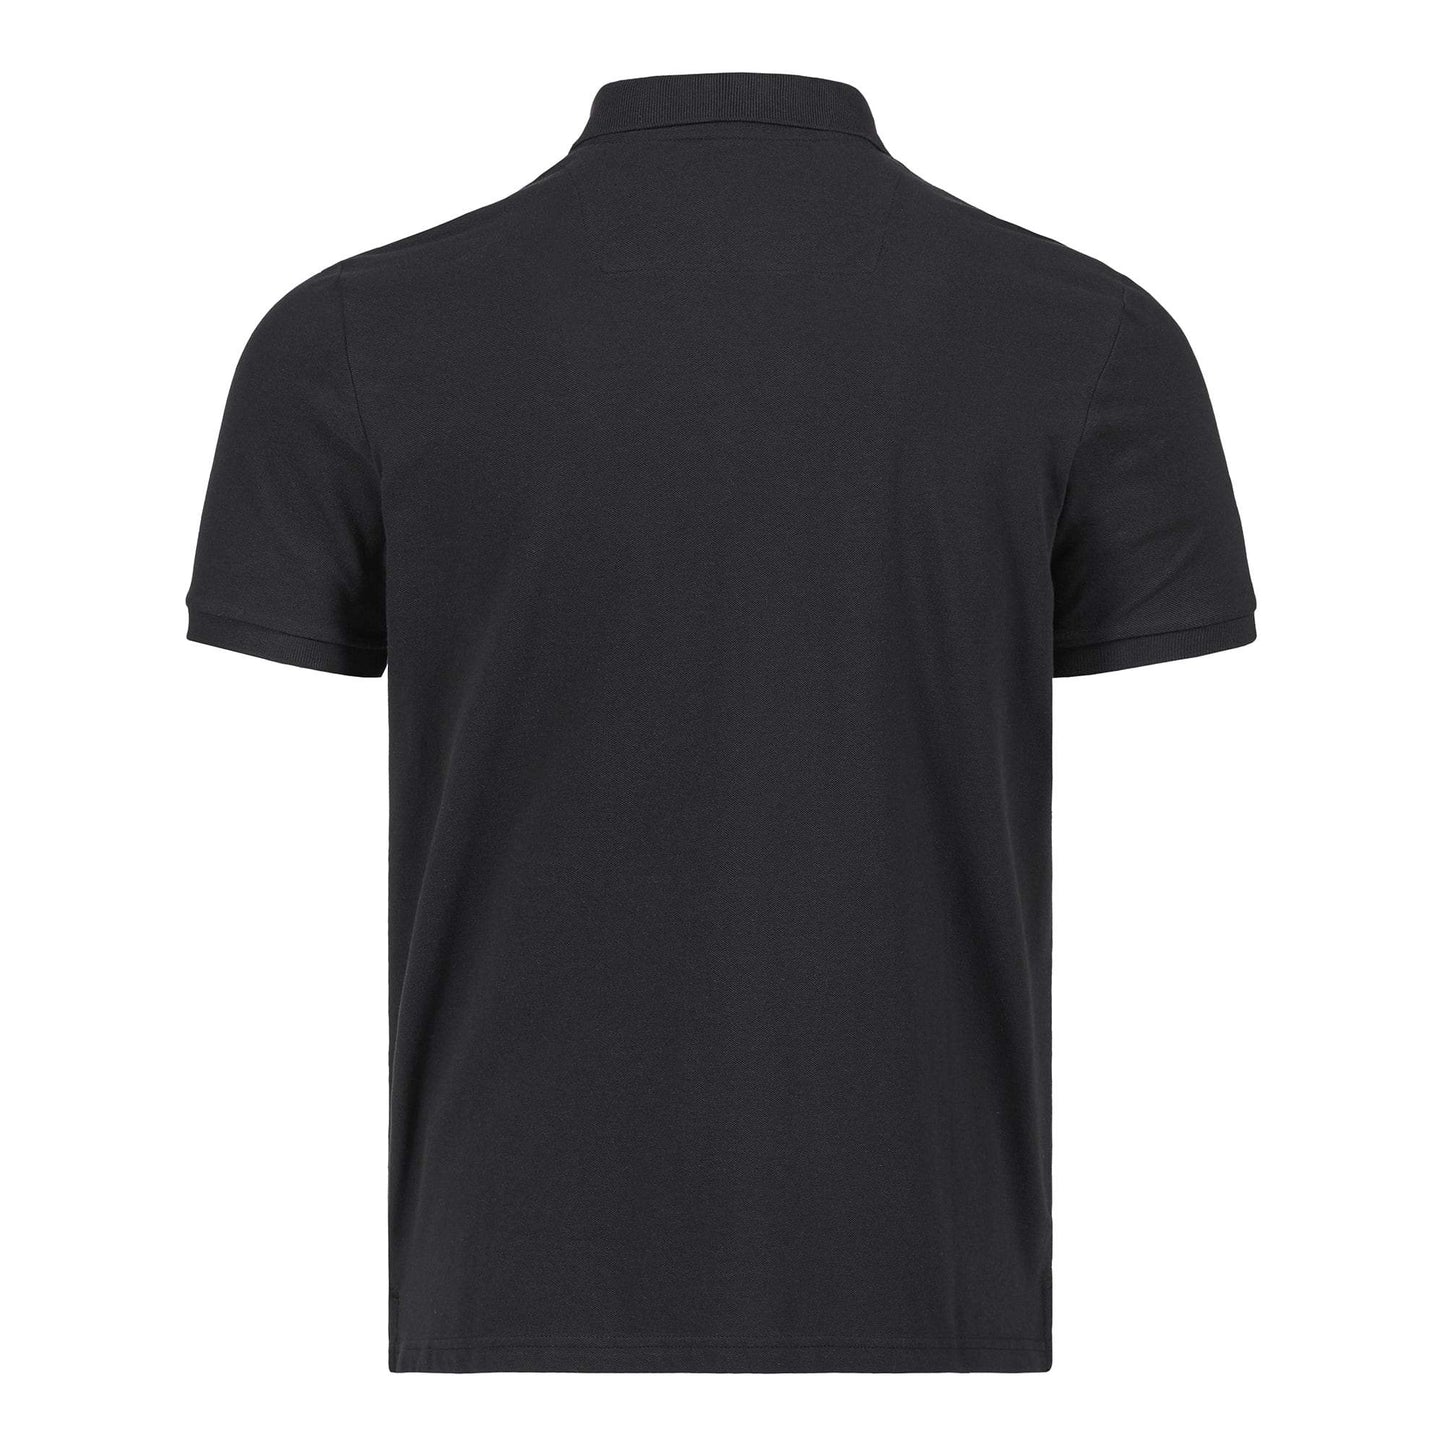 Men’s Ess Pique Polo by Musto - The Luxury Promotional Gifts Company Limited